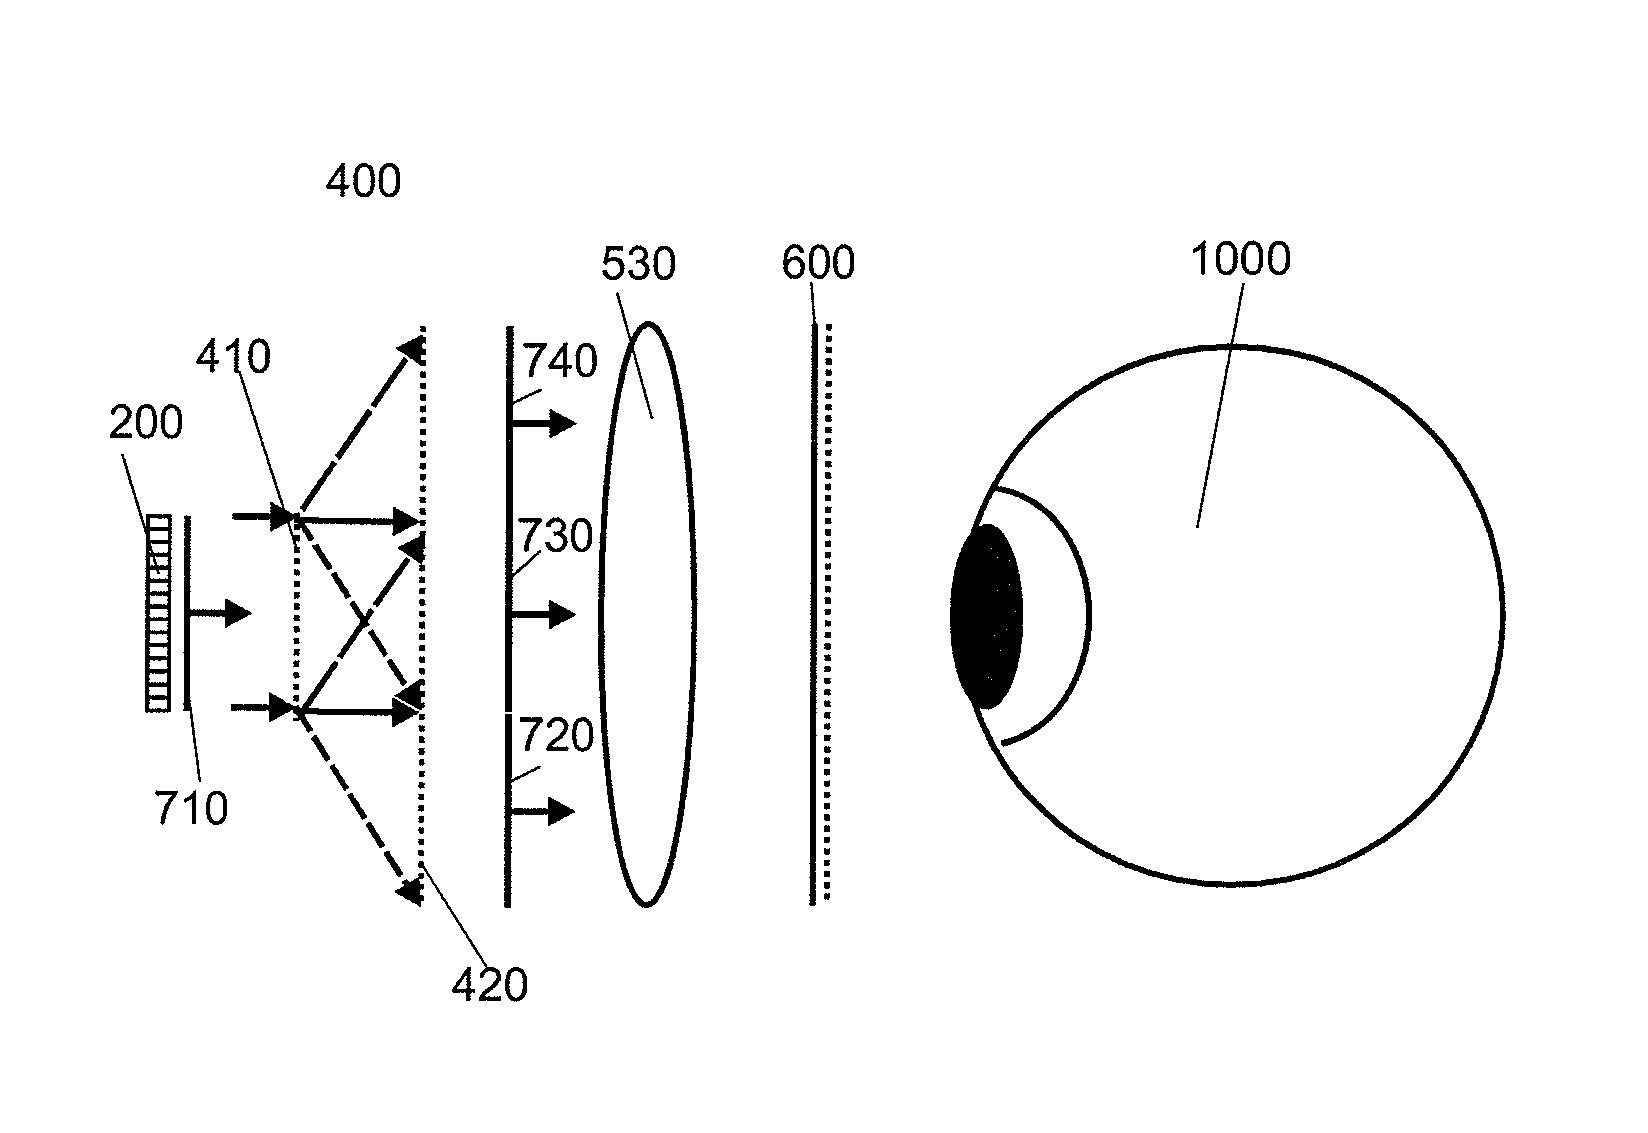 Display device, in particular a head-mounted display, based on temporal and spatial multiplexing of hologram tiles